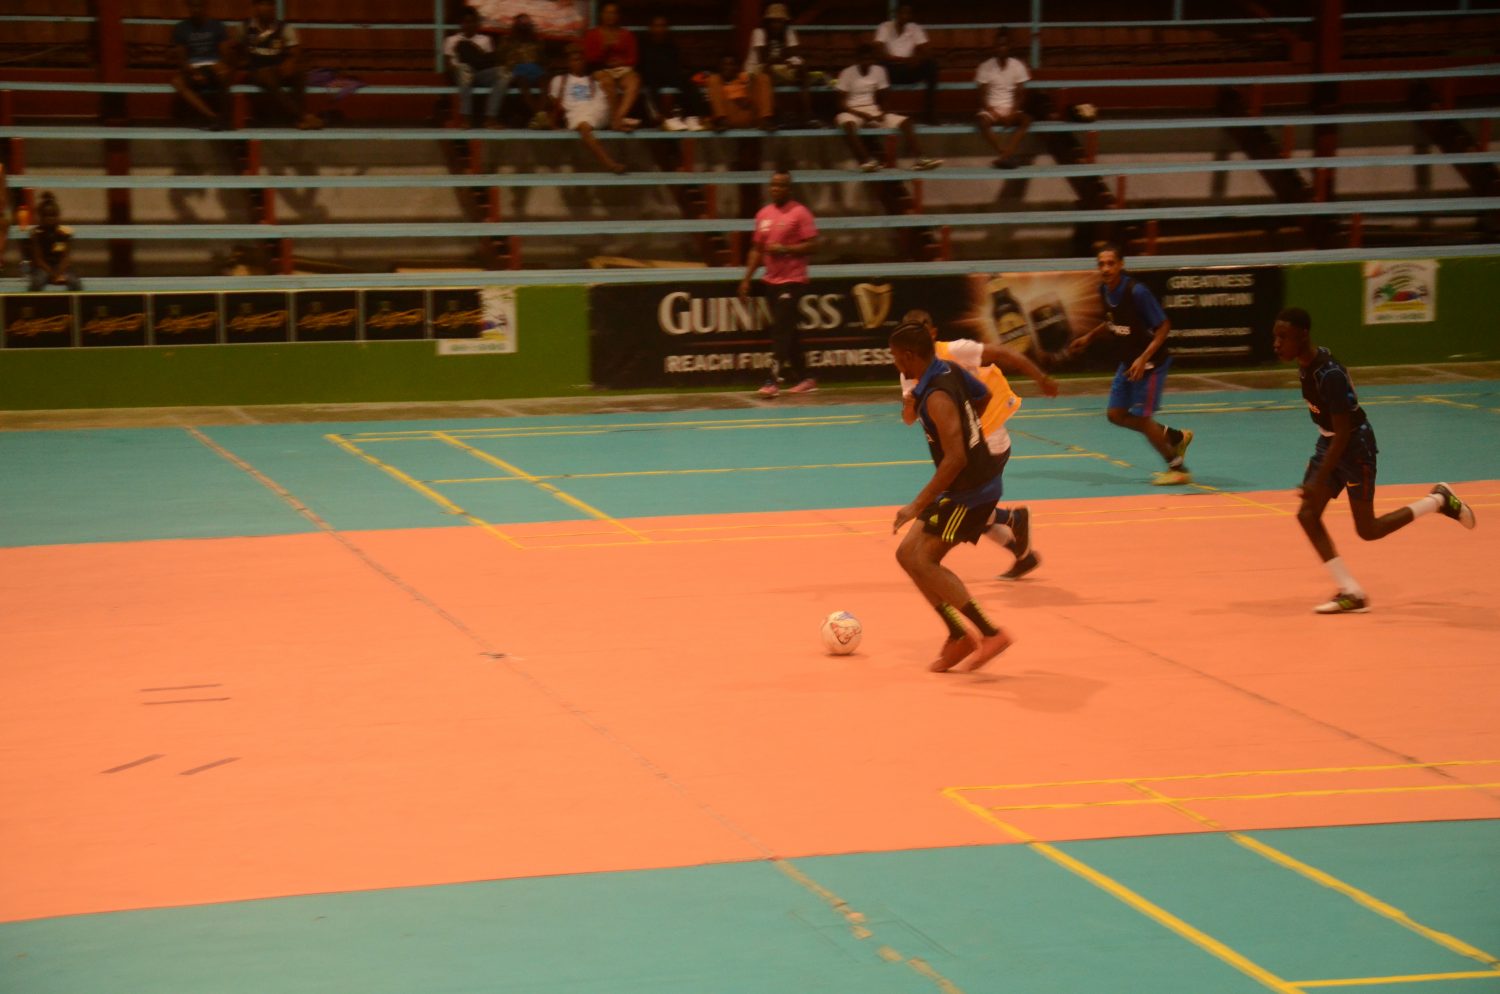 Scenes from the MBK All-Stars and Leopold Street  group clash in the Guinness ‘Cage’ Football Championship at the National Gymnasium, Mandela Avenue.